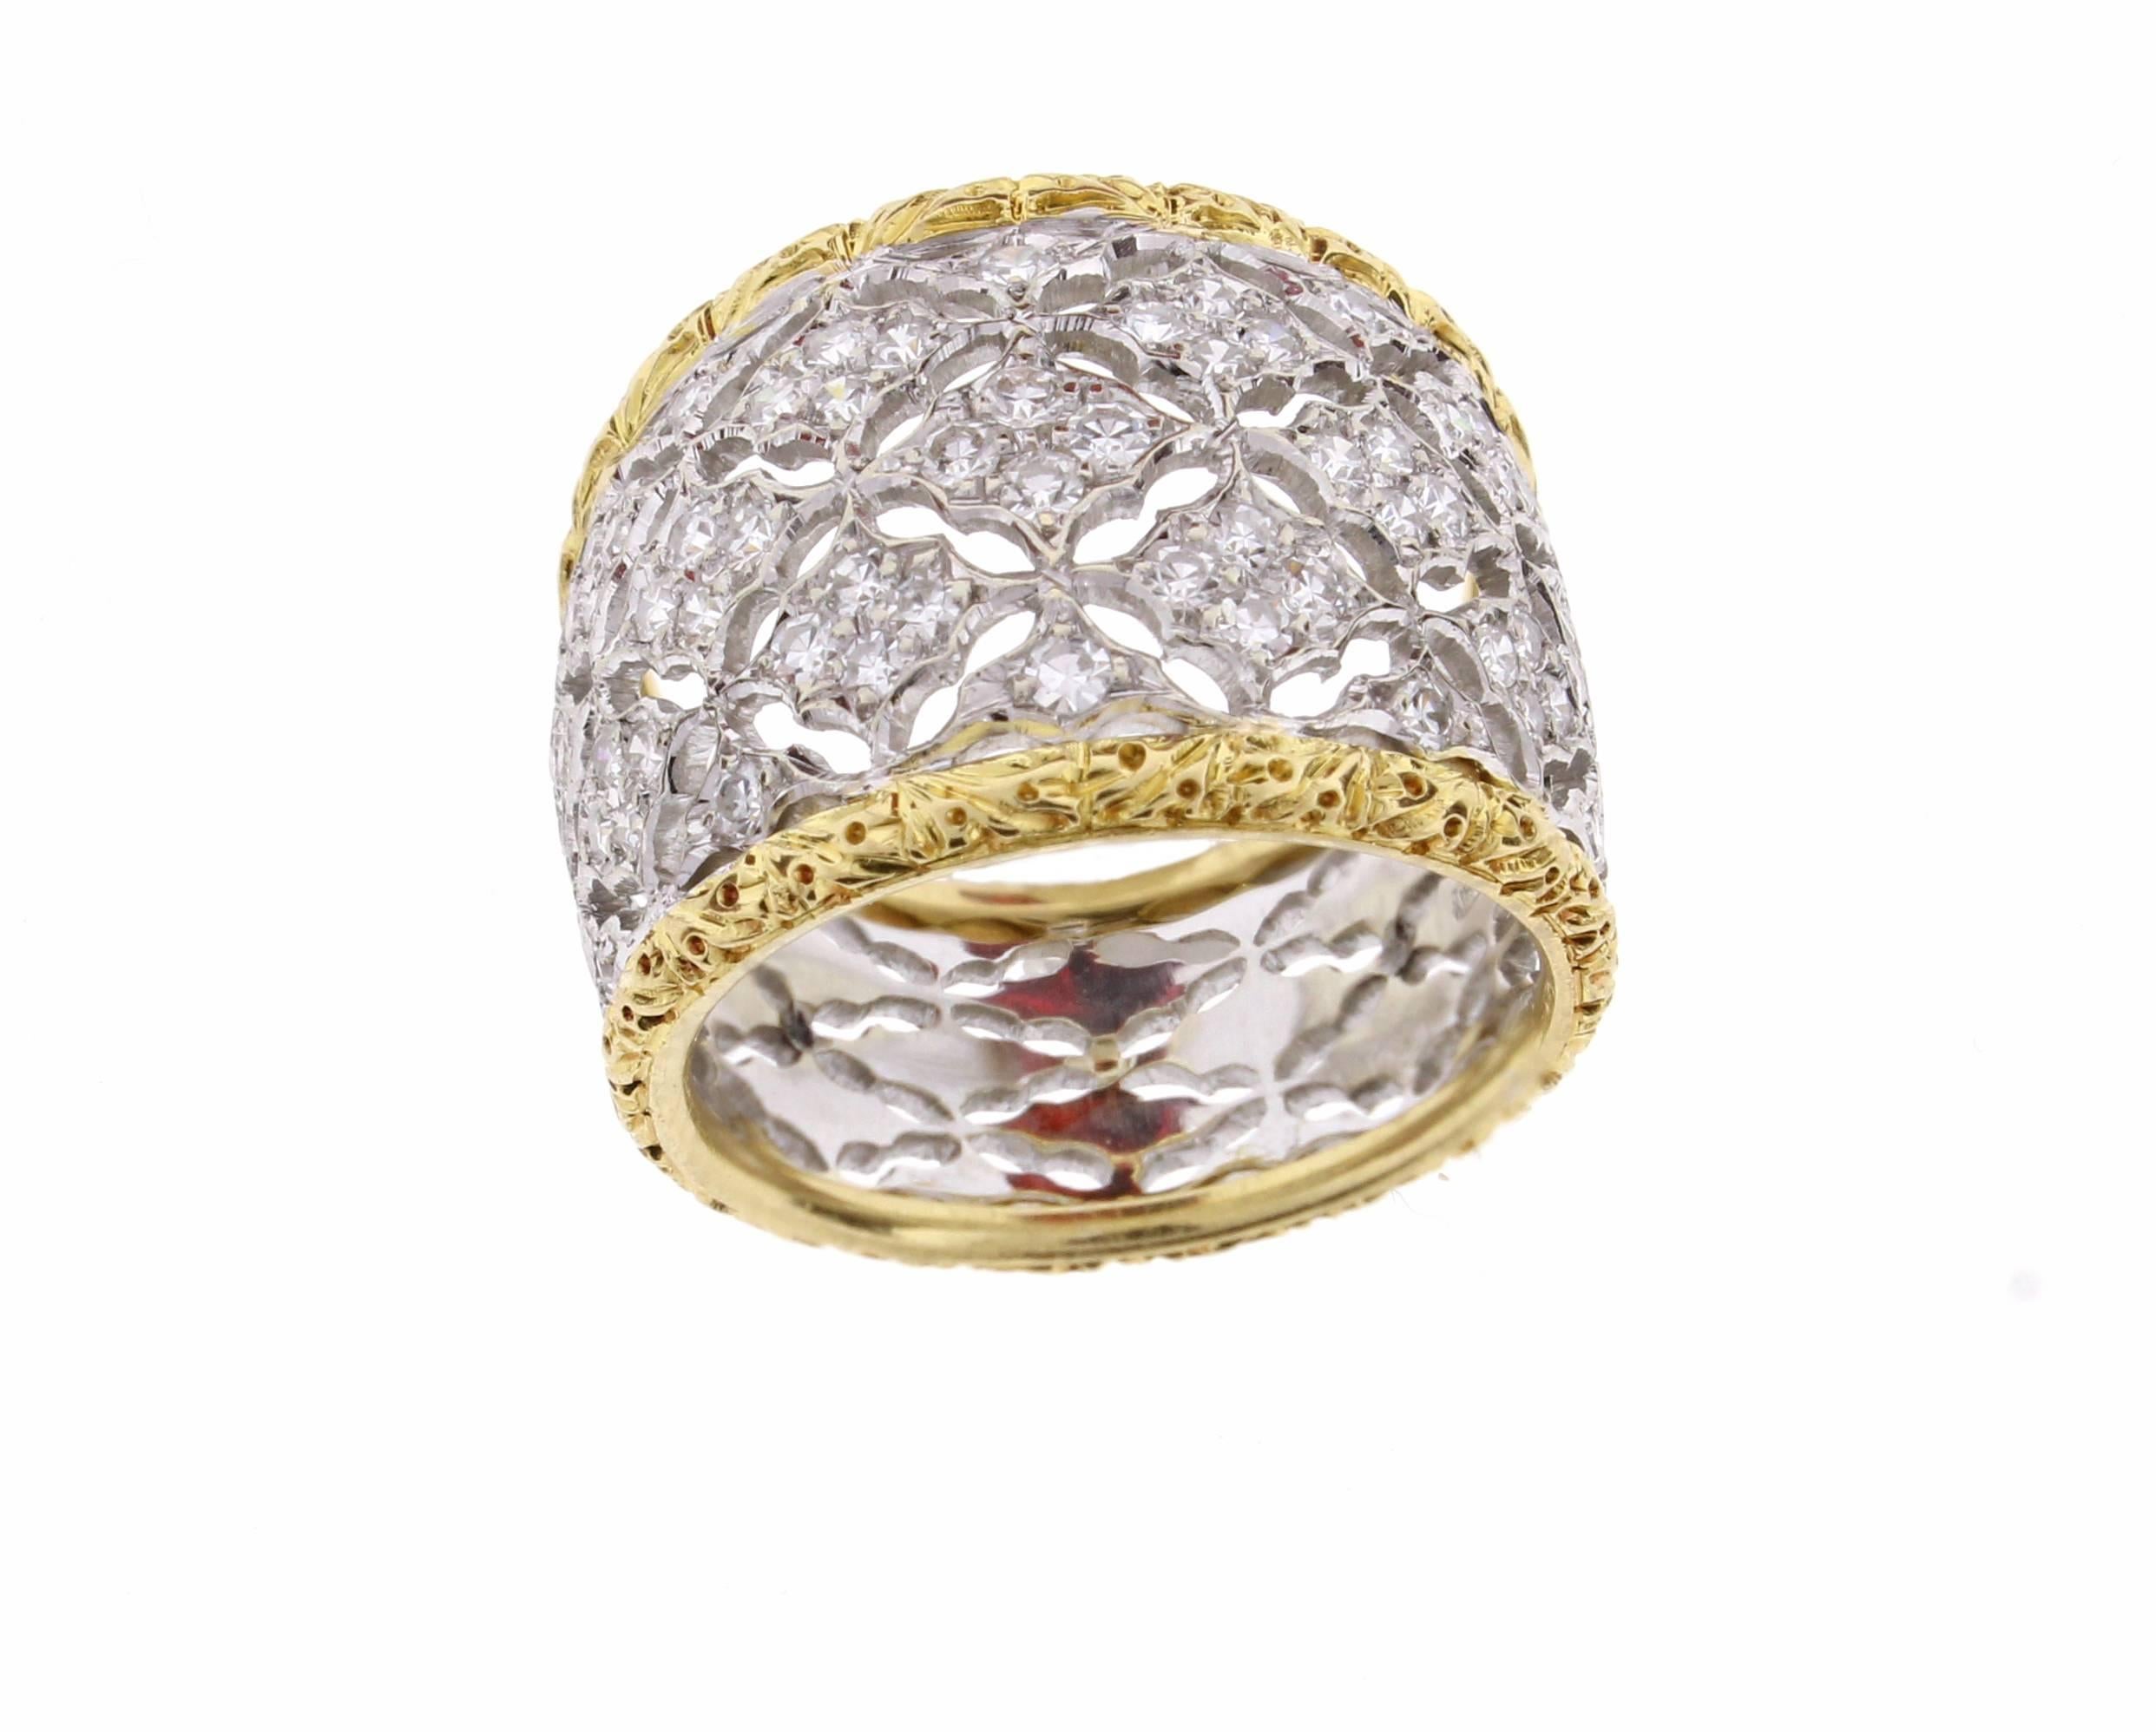  Federico Buccellati ring in 18 Karat yellow and white gold. 
This wide diamond ring features white gold filigree set with sixty two brilliant cut diamonds weighing .60 carats edged with yellow gold filigree. The ring tapers from 16mm to 10mm 8.4